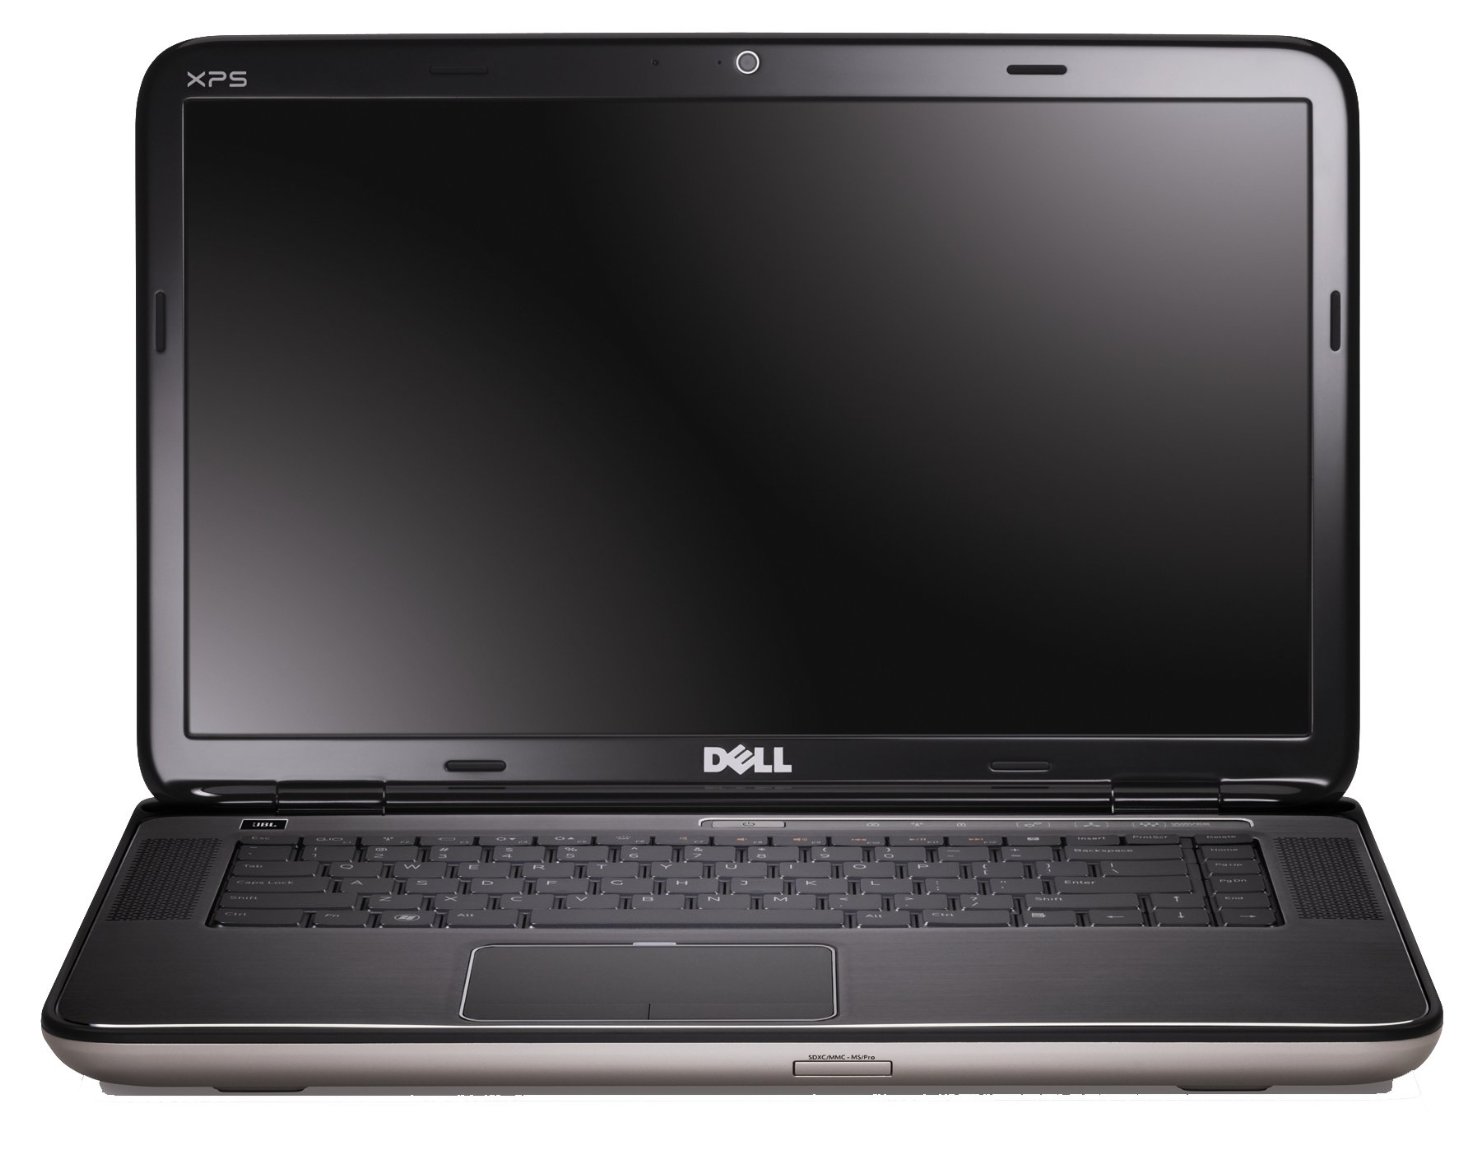   Dell XPS 15 (9560-5570)  1